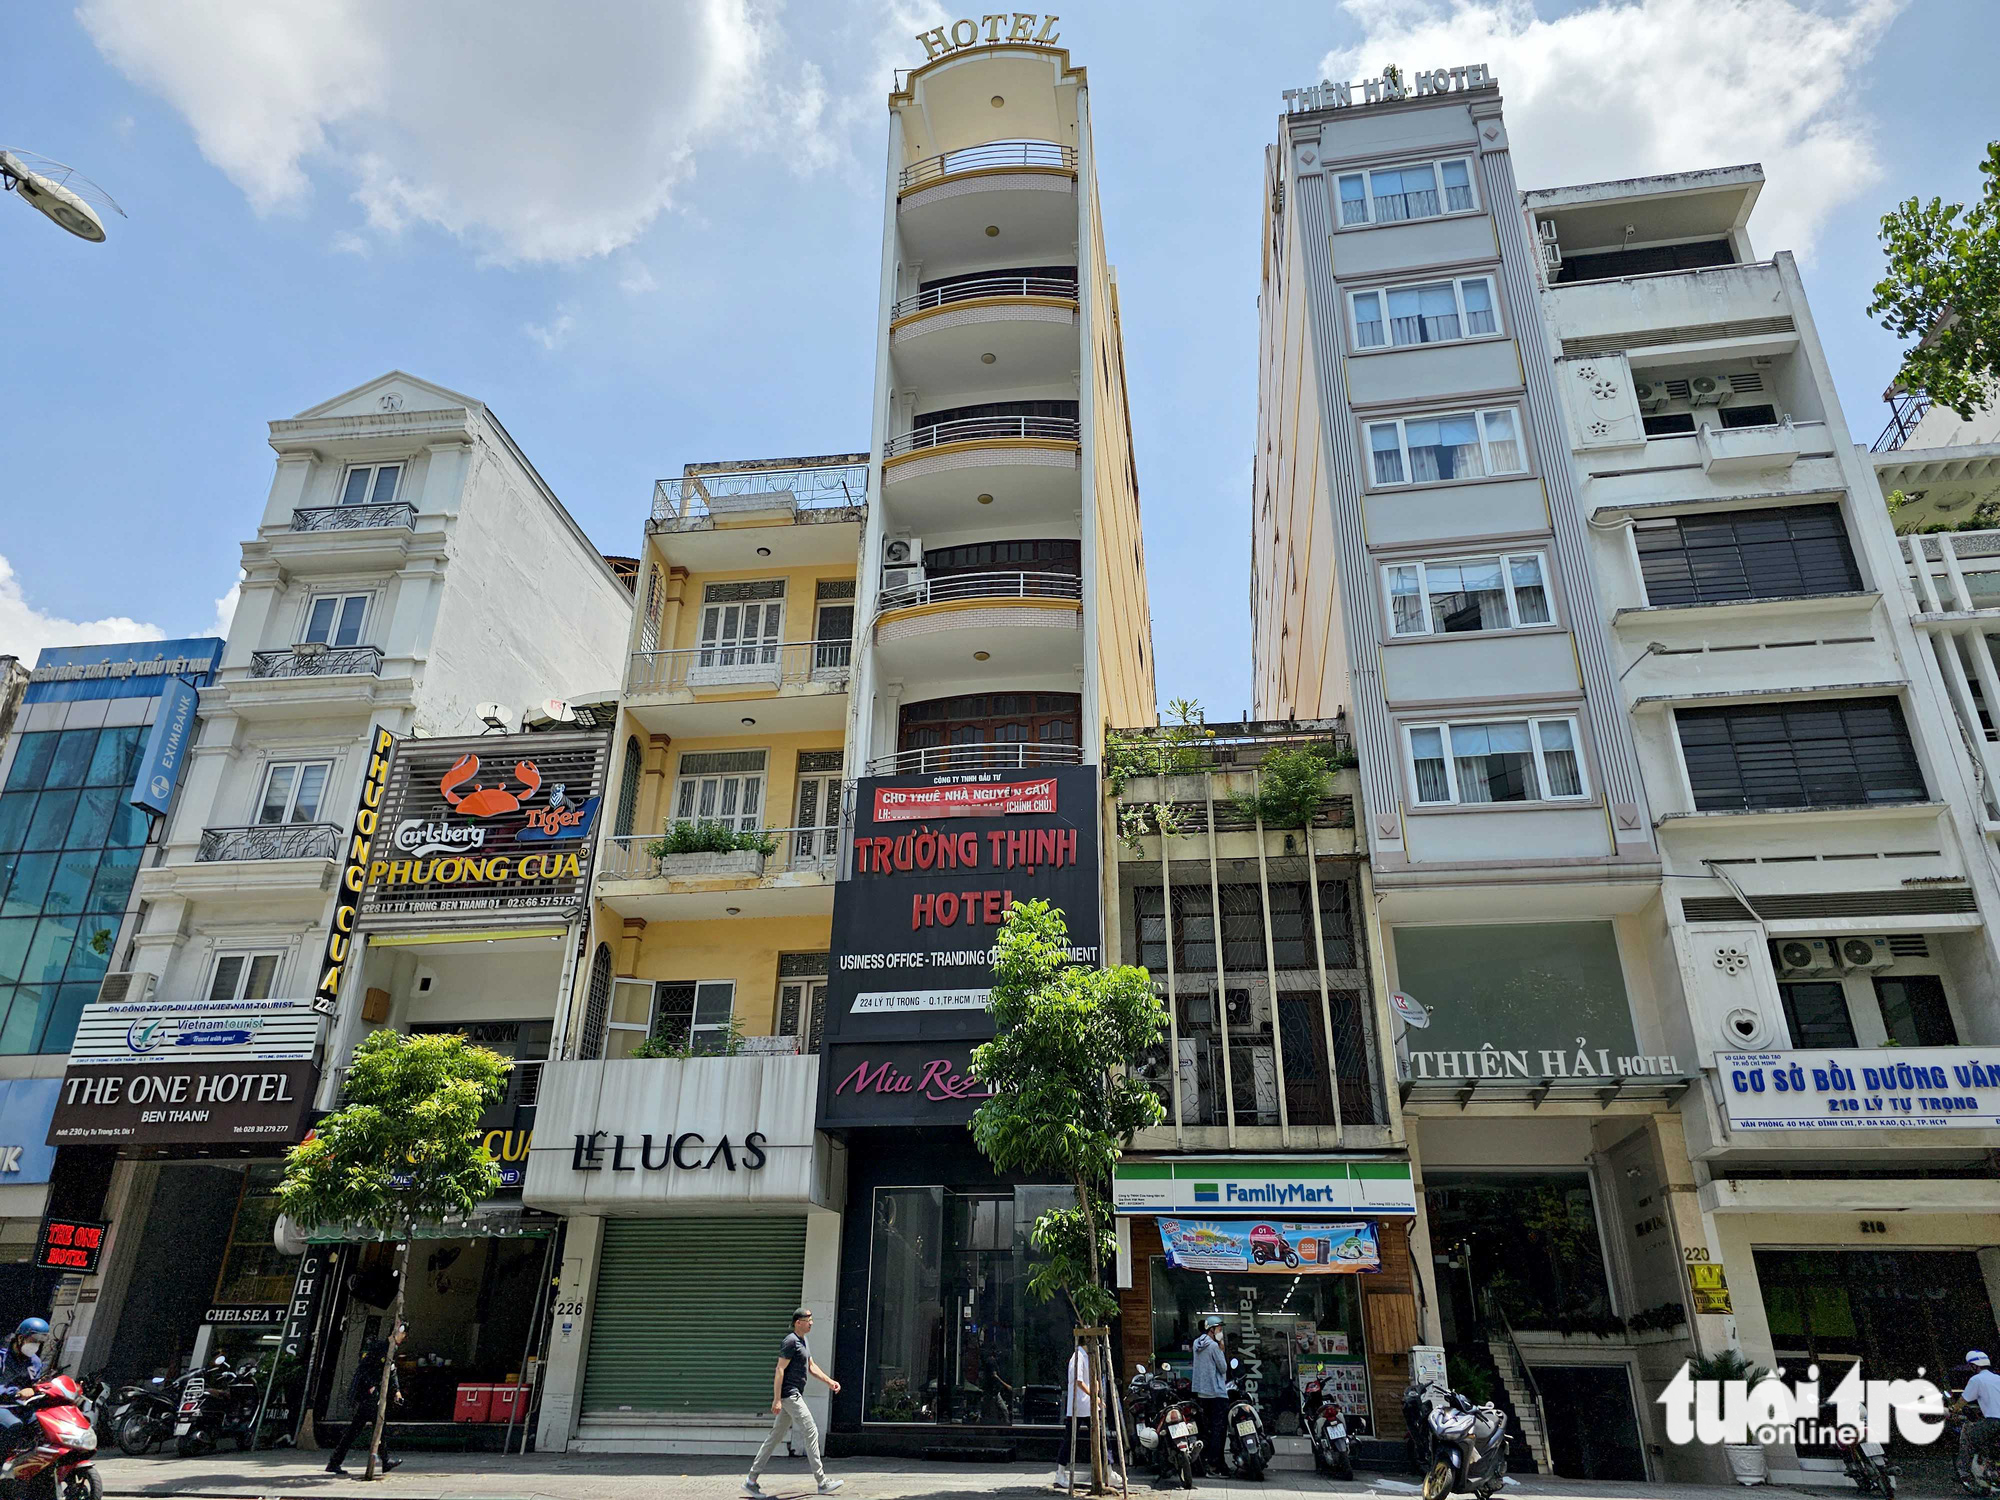 A hotel named T.T. on Ly Tu Trong Street, District 1, Ho Chi Minh City has hung a notice saying “Available for rent” for almost three years. Photo: Ngoc Hien / Tuoi Tre